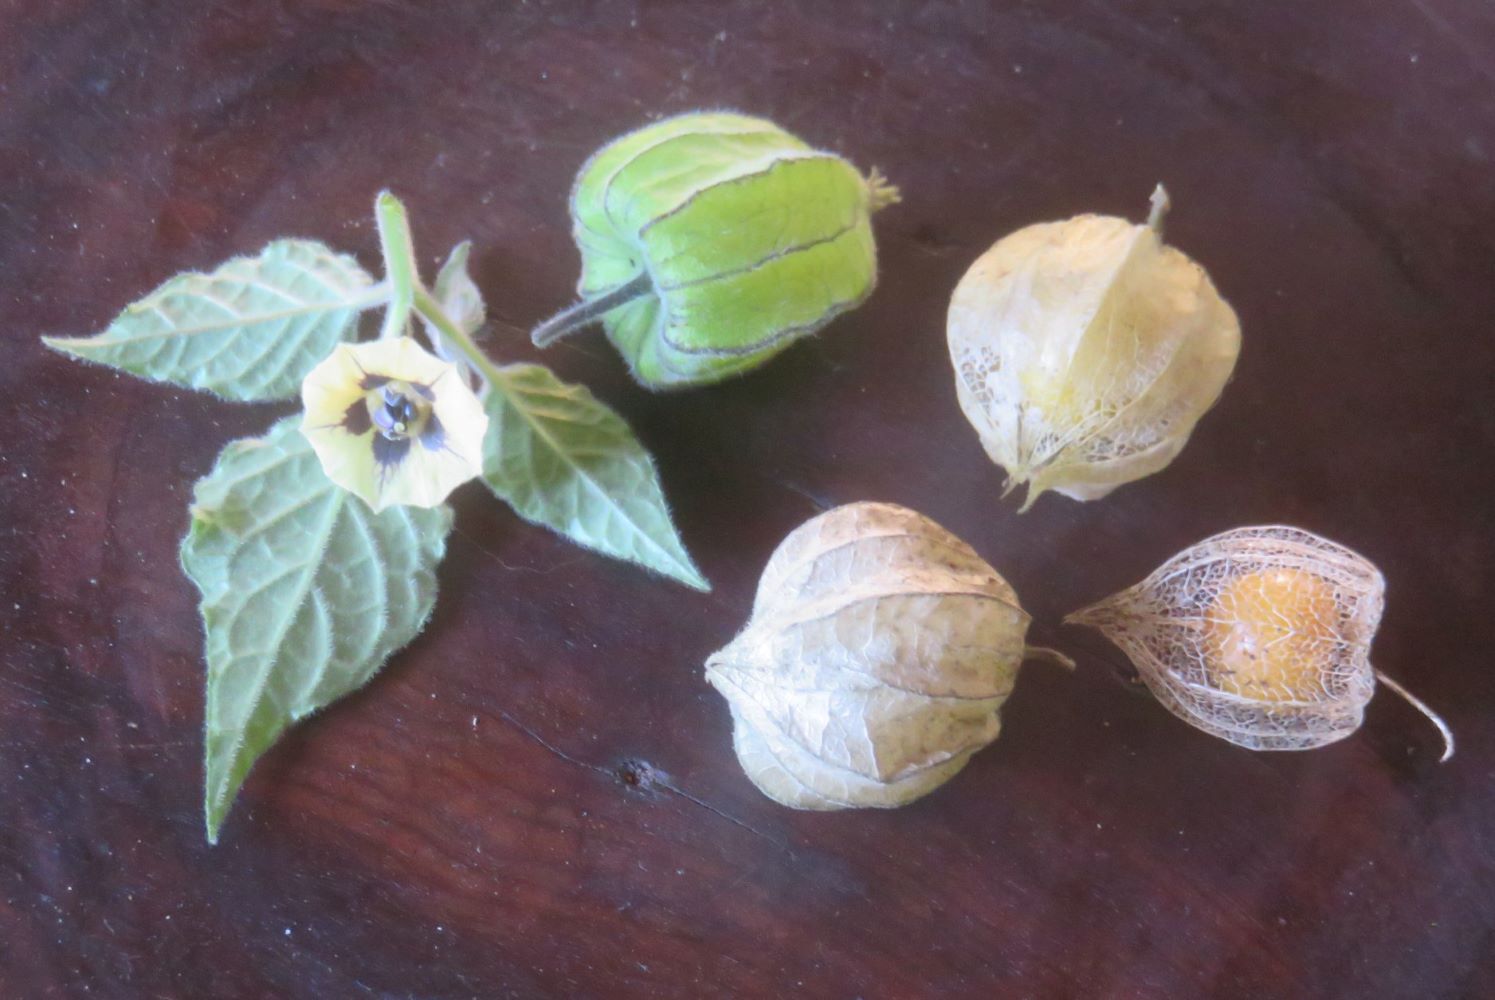 The Cape gooseberry. Very nutritious, but it originally came from Peru. Plants adapt and so can we.